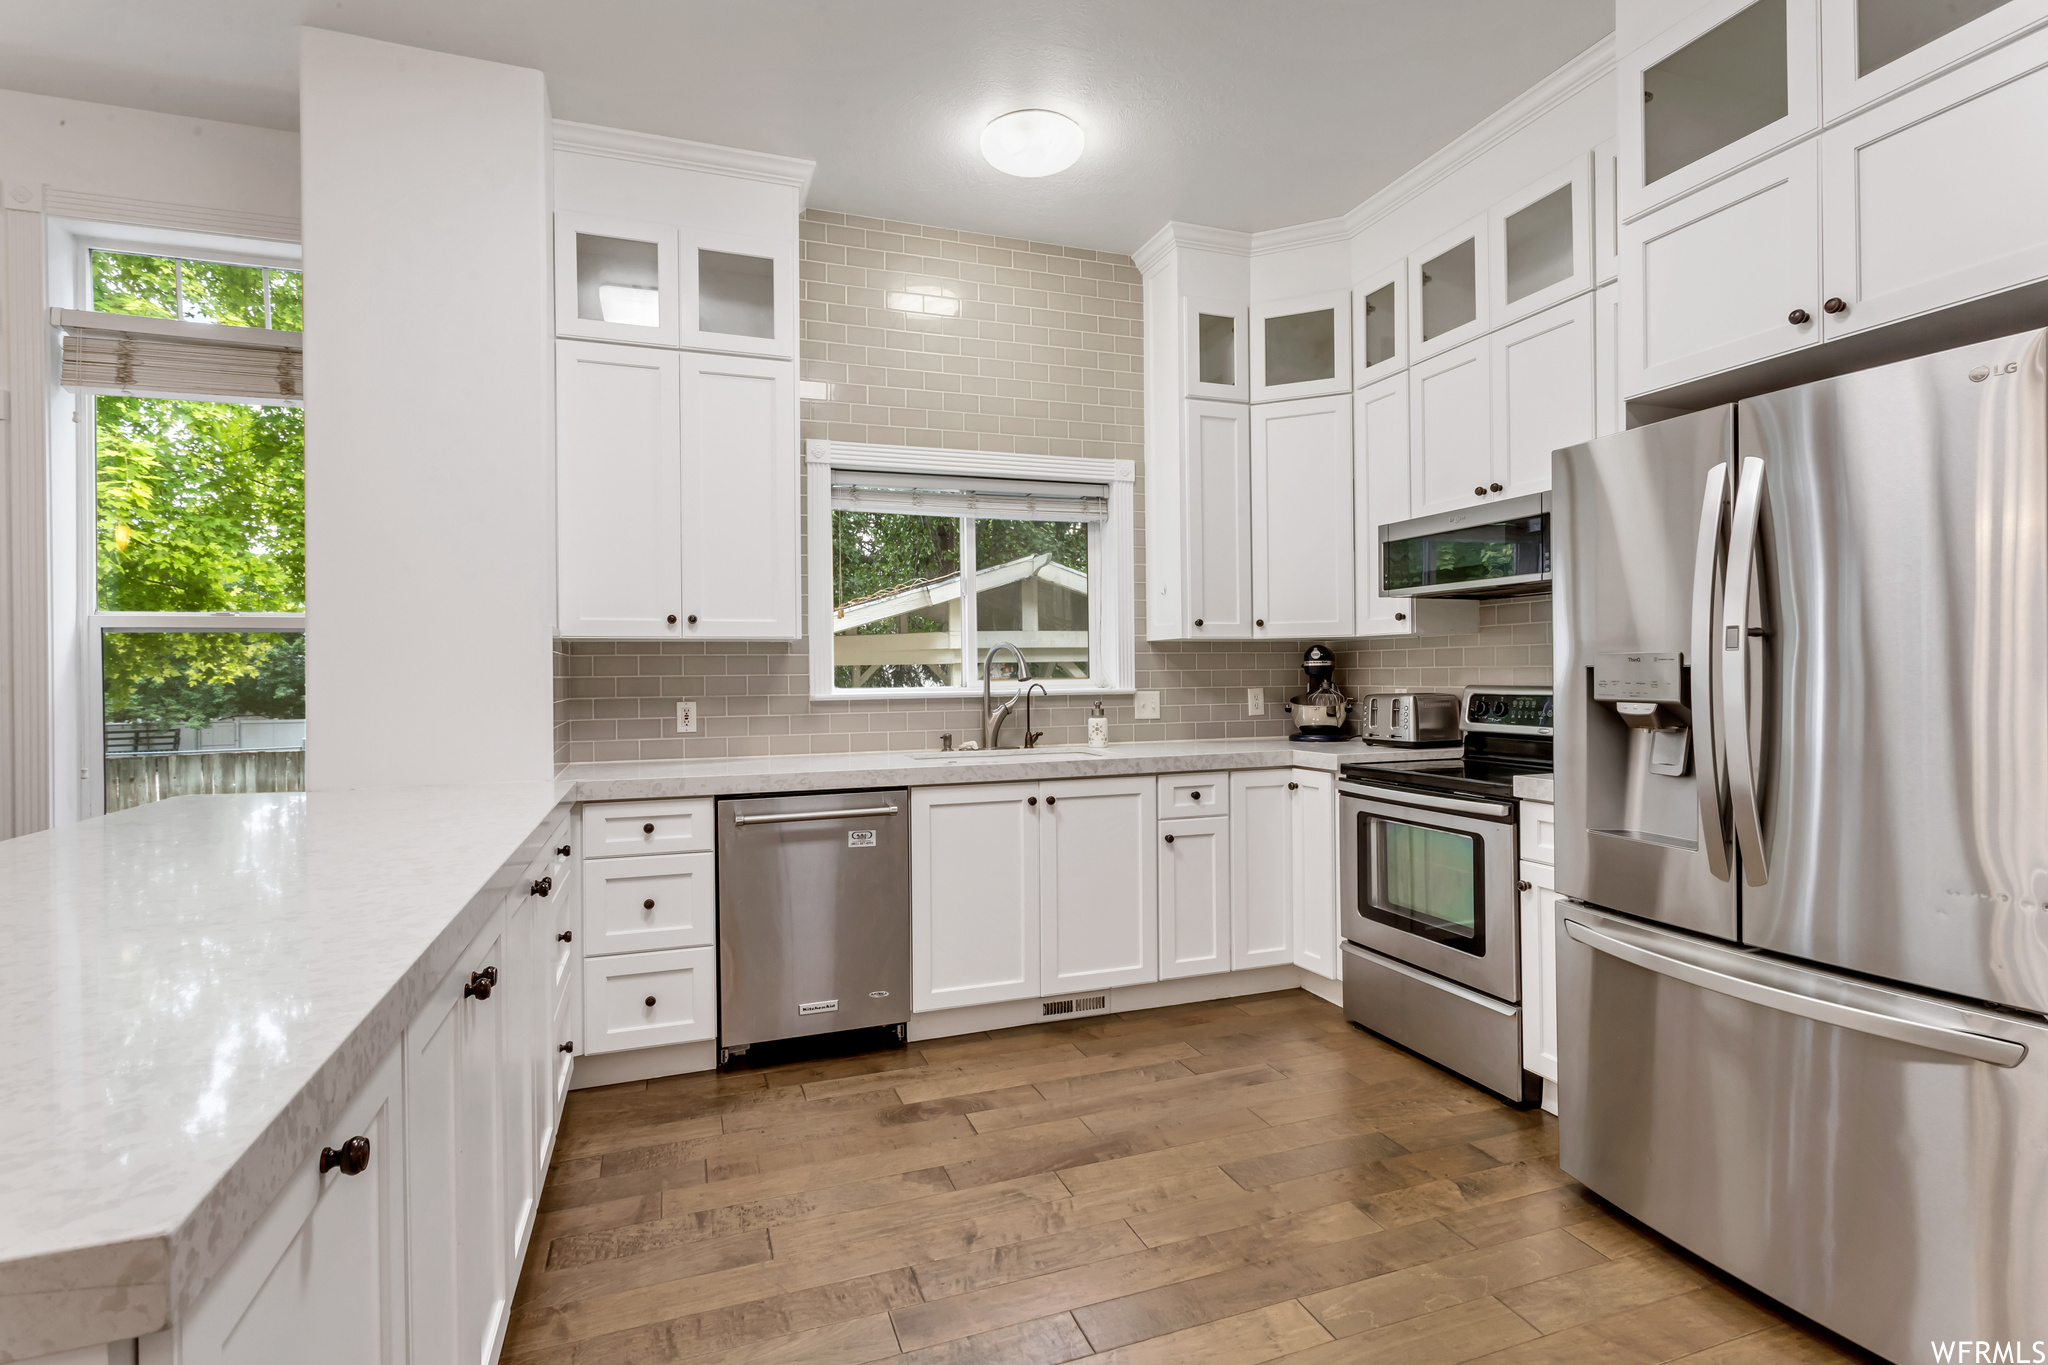 Kitchen featuring wood-type flooring, light countertops, backsplash, stainless steel appliances, and white cabinetry